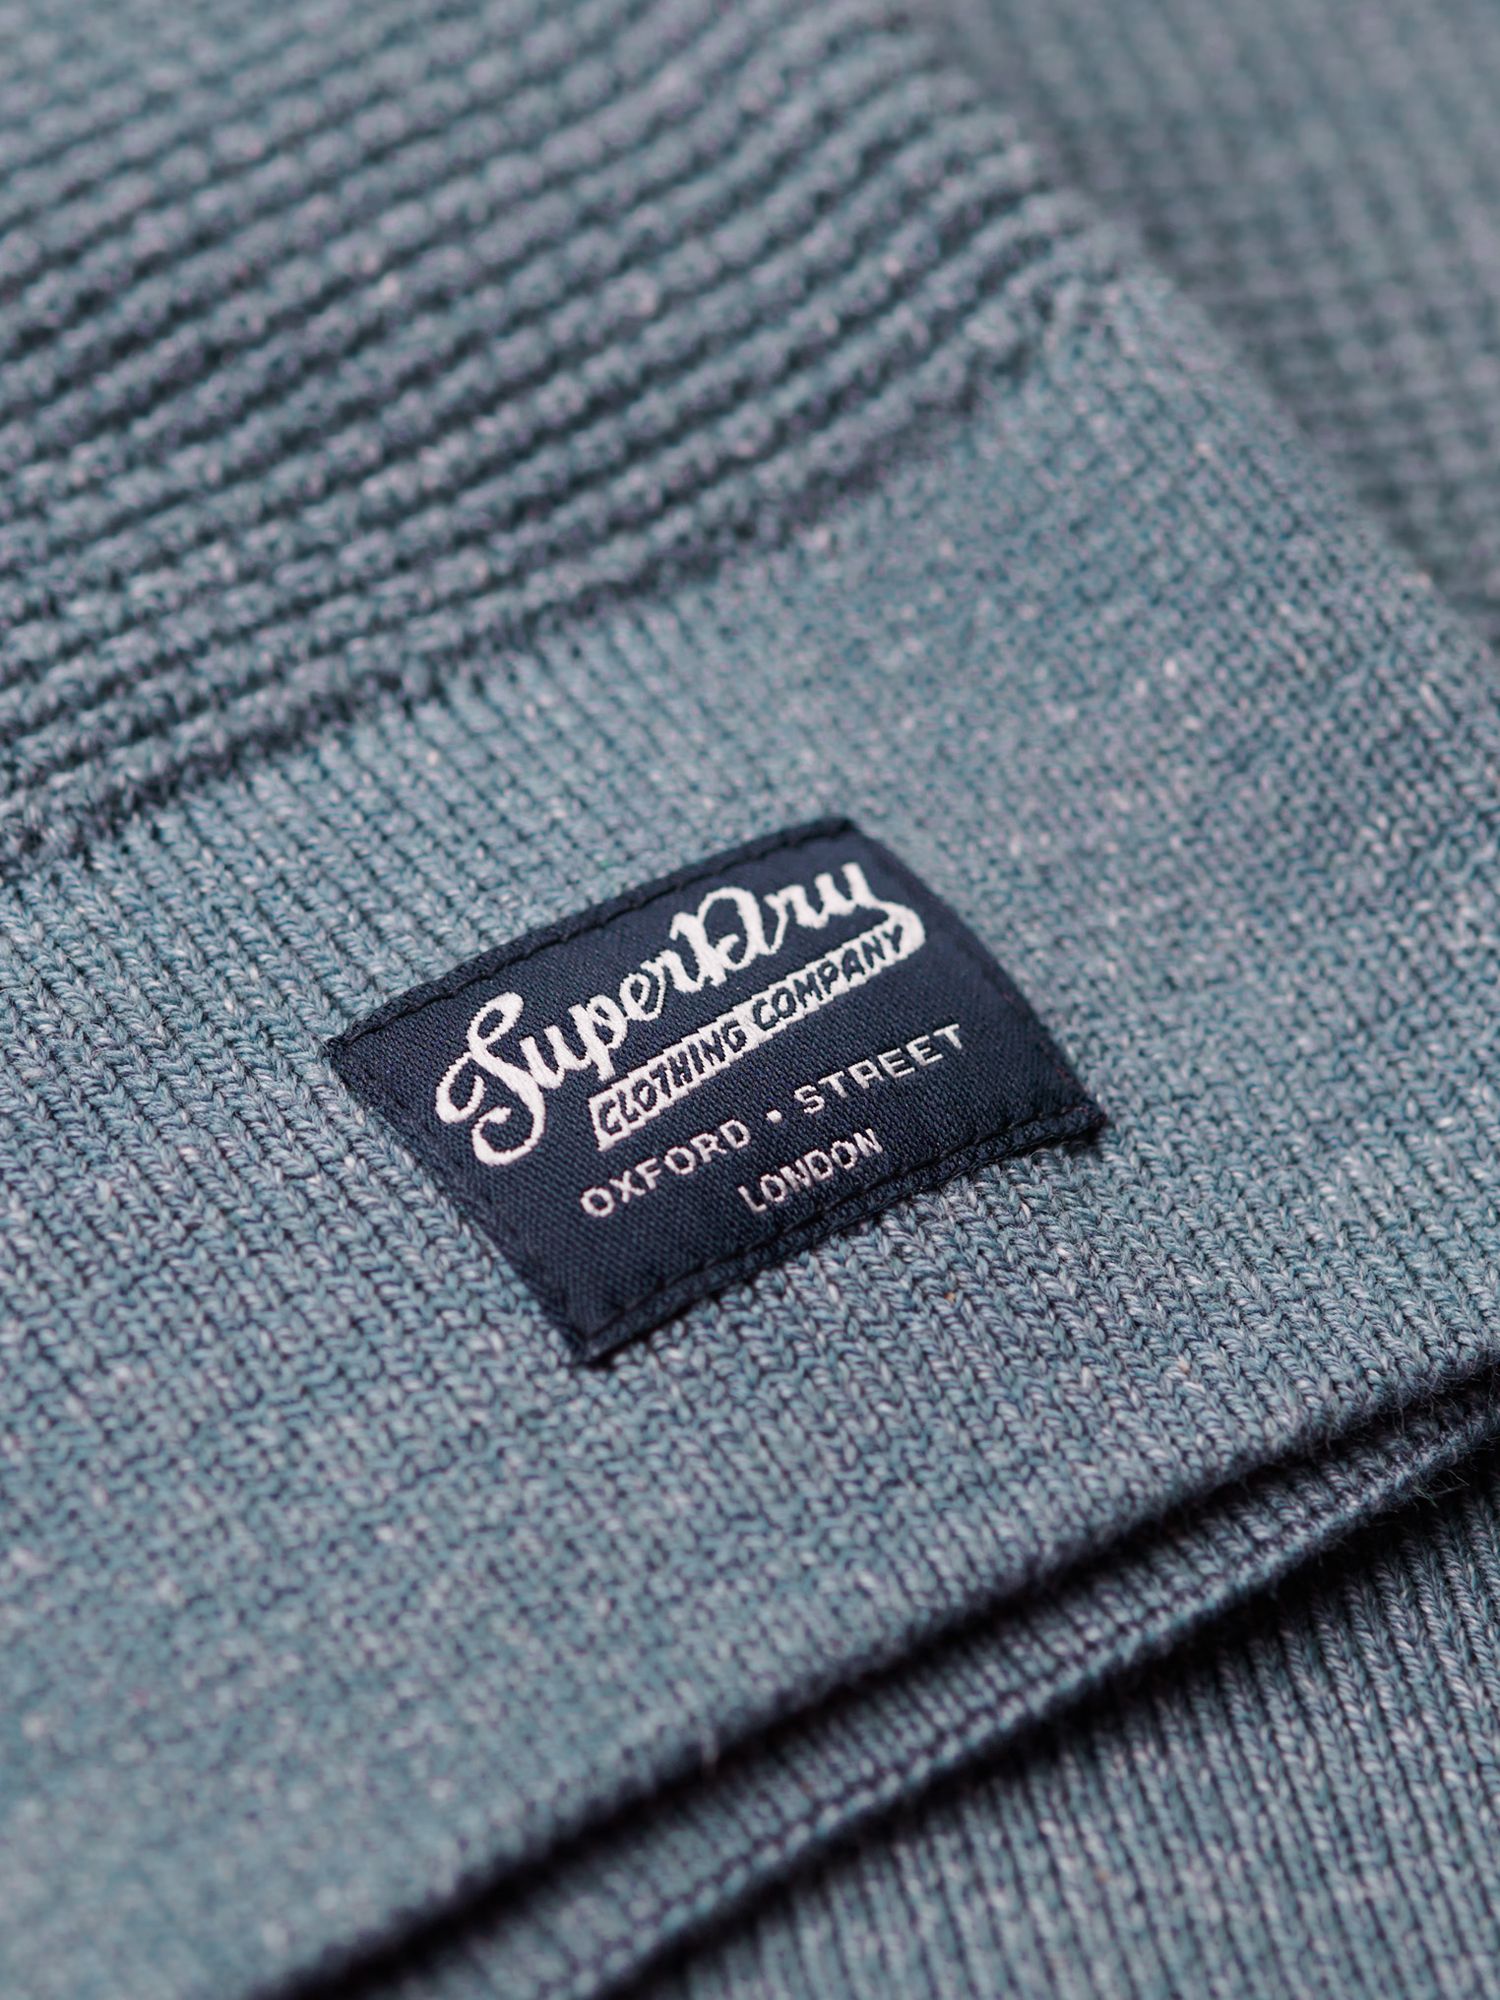 Superdry Textured Crew Knit Jumper, Blue at John Lewis & Partners